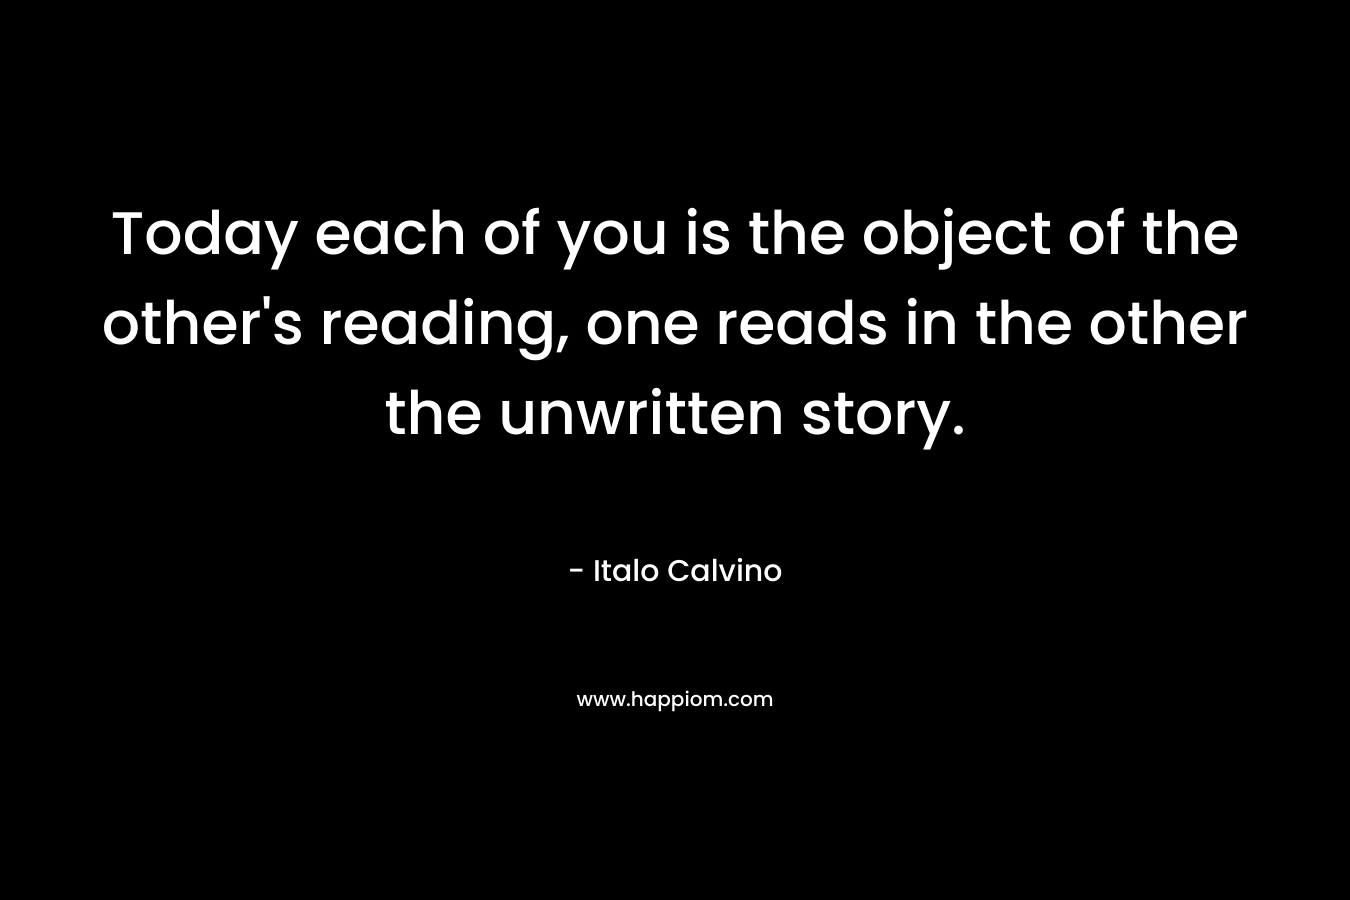 Today each of you is the object of the other's reading, one reads in the other the unwritten story.